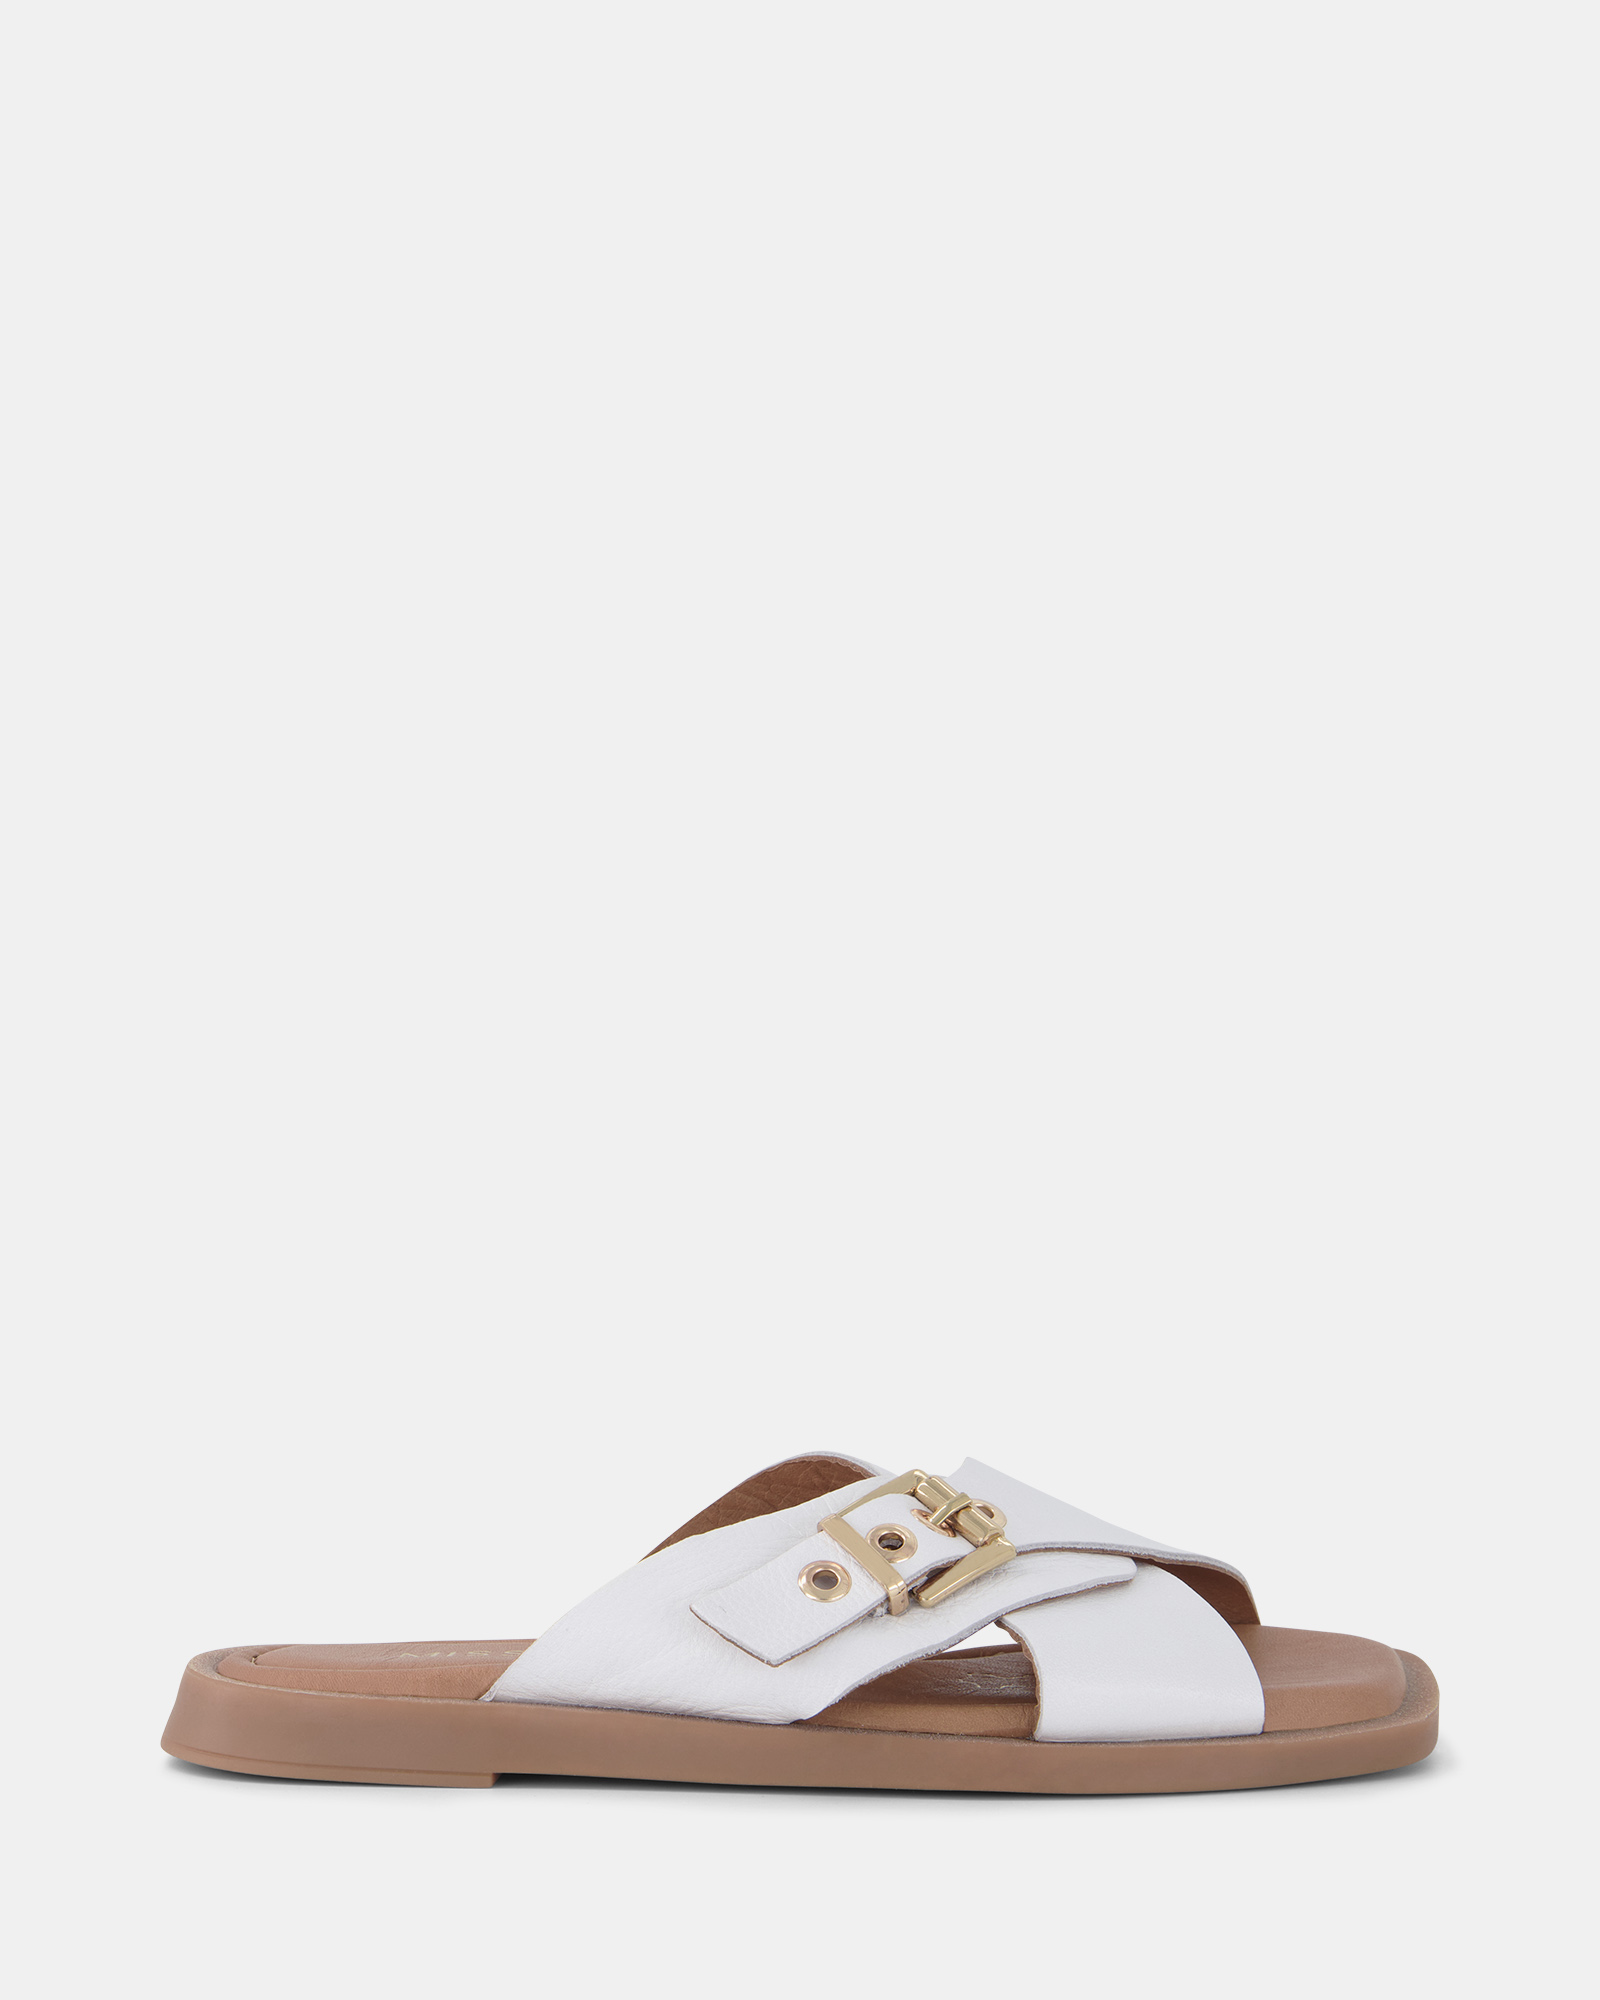 Buy CYBILL White sandals Online at Shoe Connection